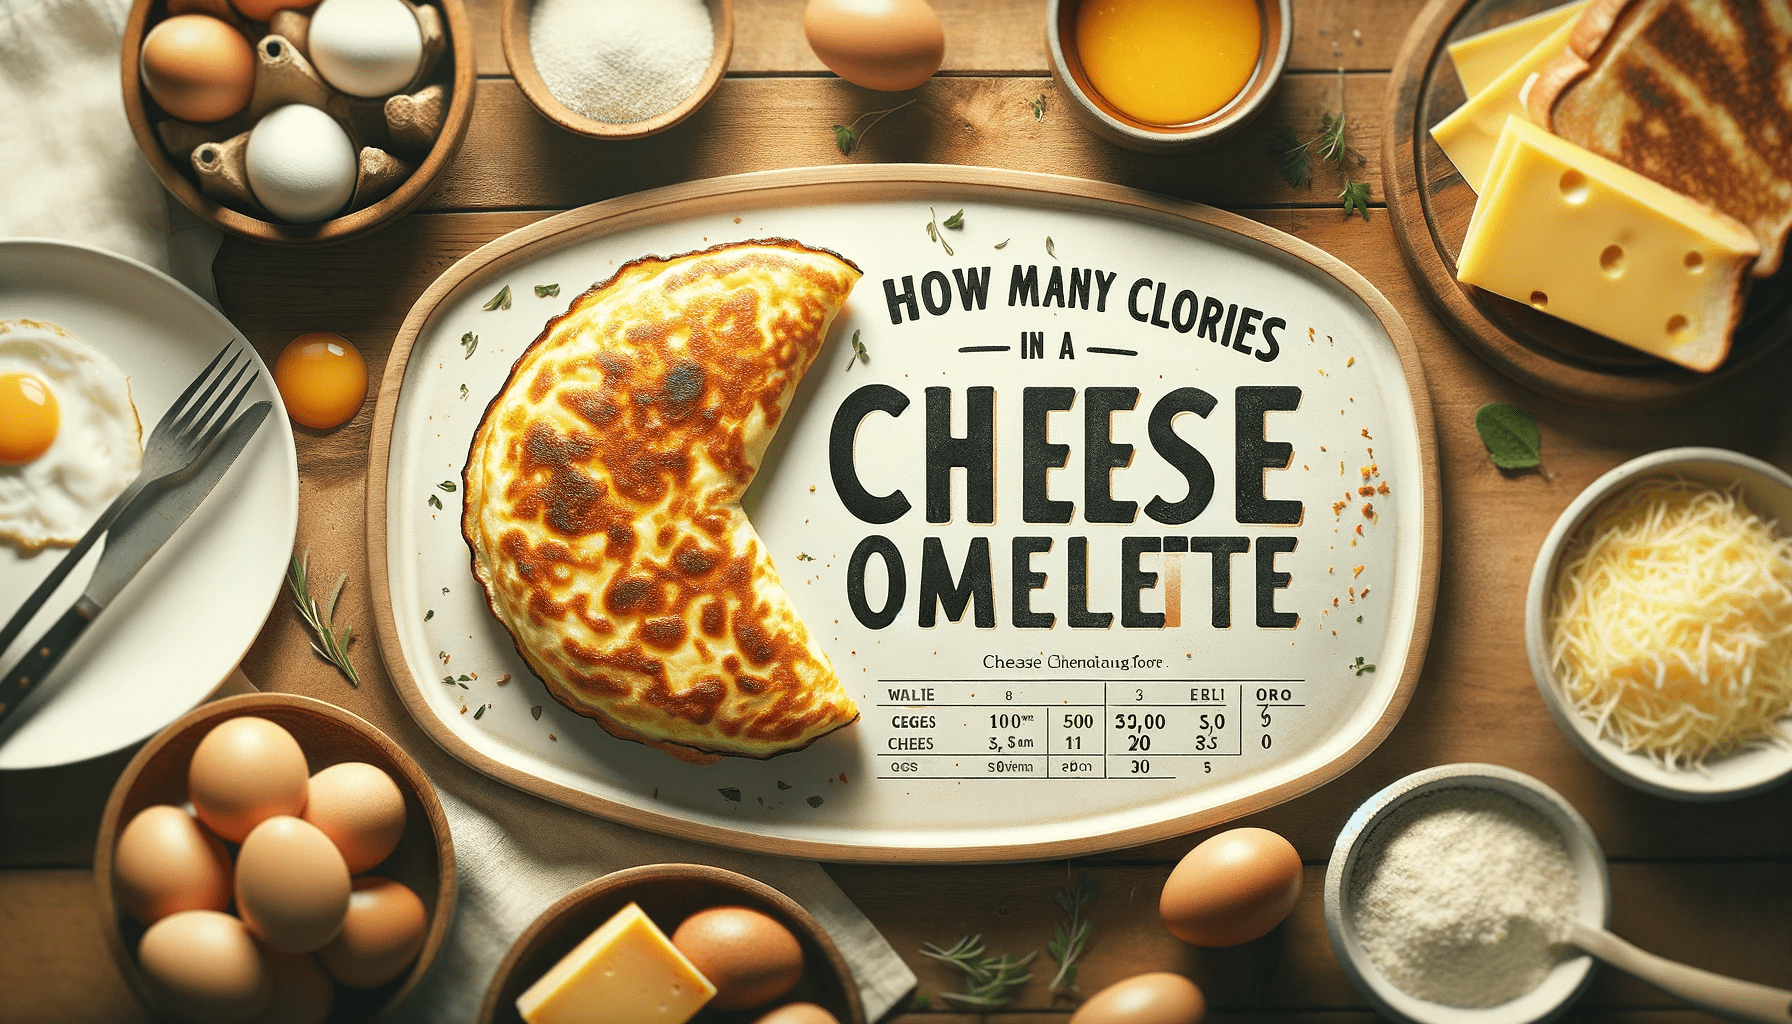 How Many Calories in a Cheese Omelette